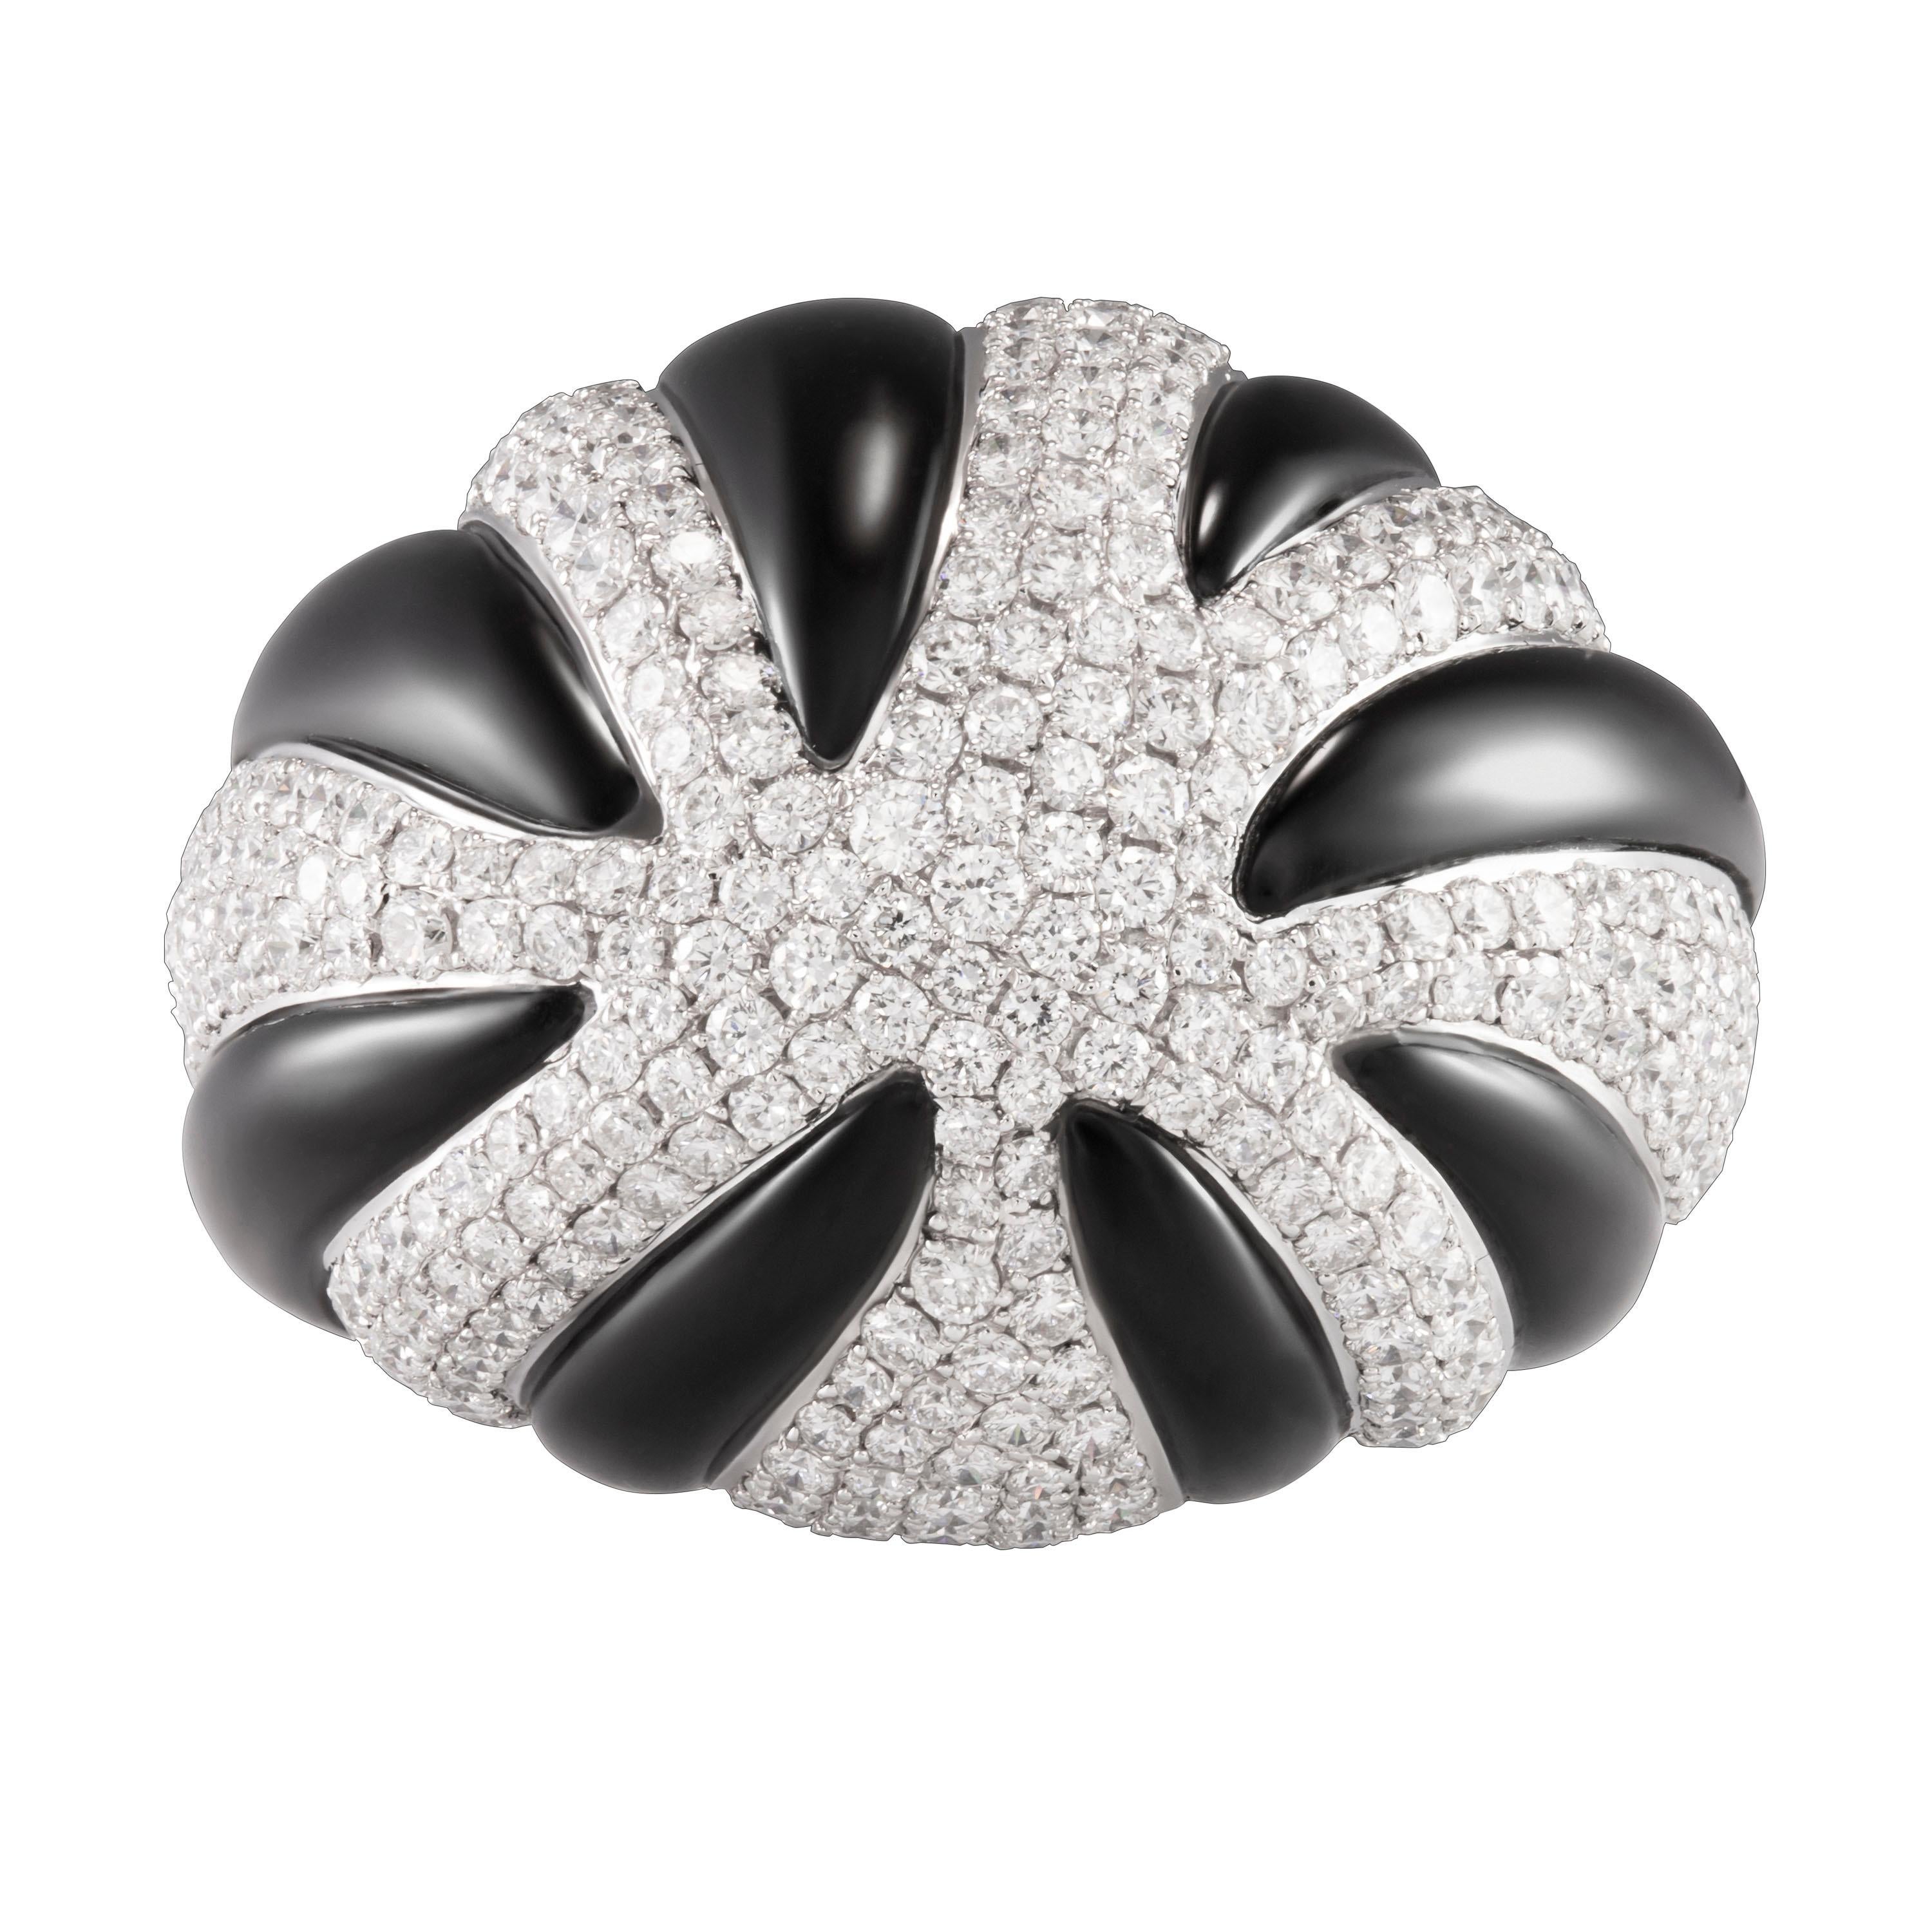 Butani's stylish ring features a prominent bombe design crafted in 18K white gold.  Pavé set with 3.8 carats of round brilliant cut diamonds and accentuated with 8 black onyx stripes (totaling 12.31 carats), this ring can be worn as a chic, casual